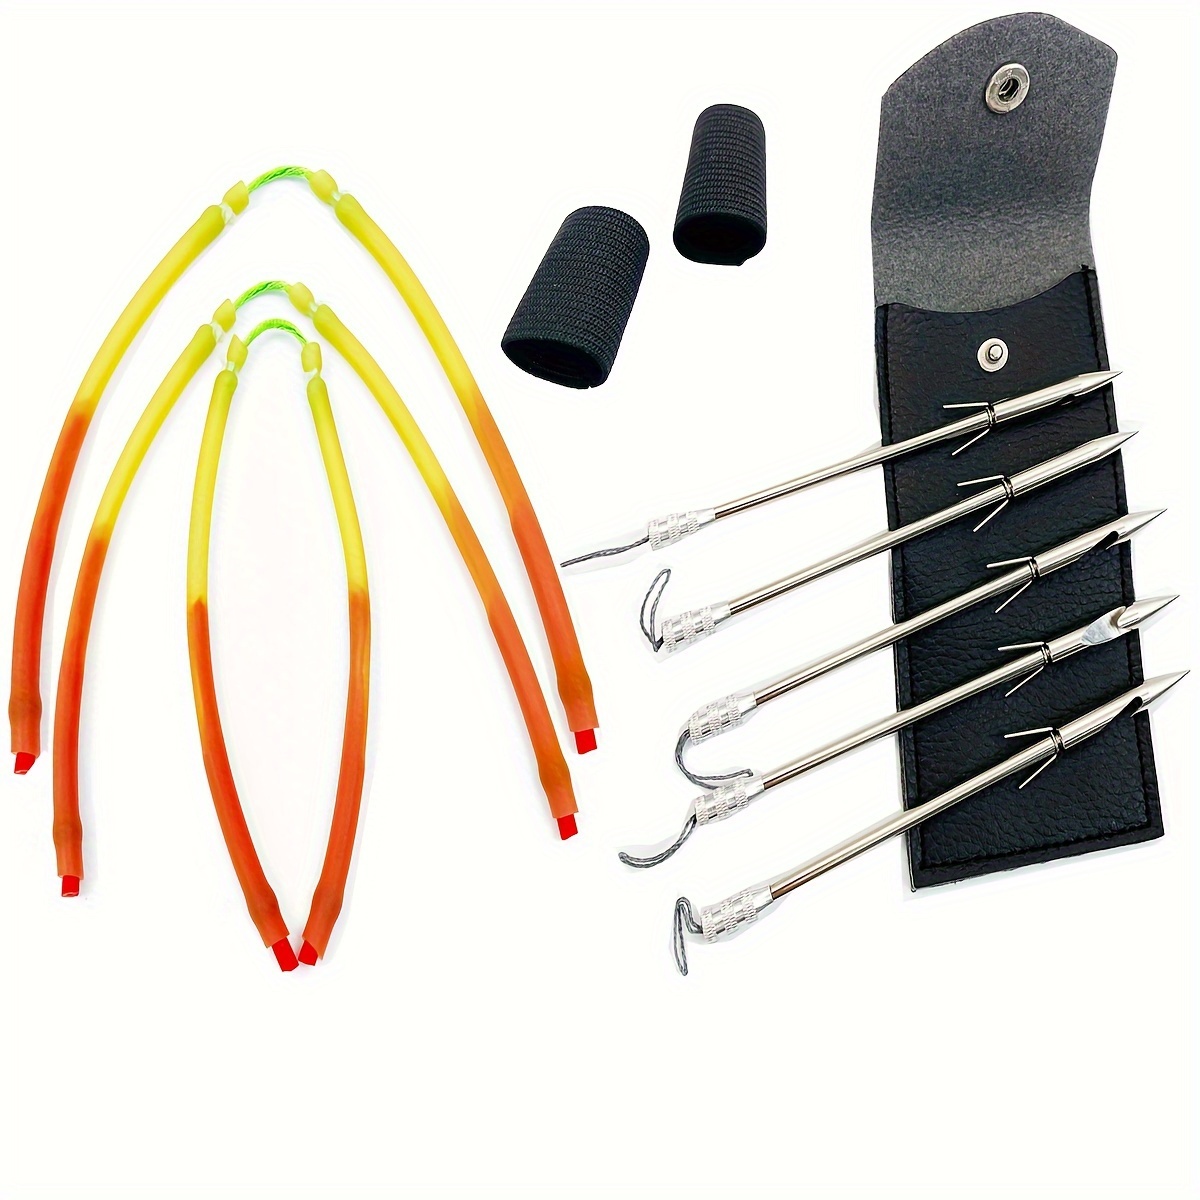 Adults Launcher Fishing Hunting Sling Shot With Arrows